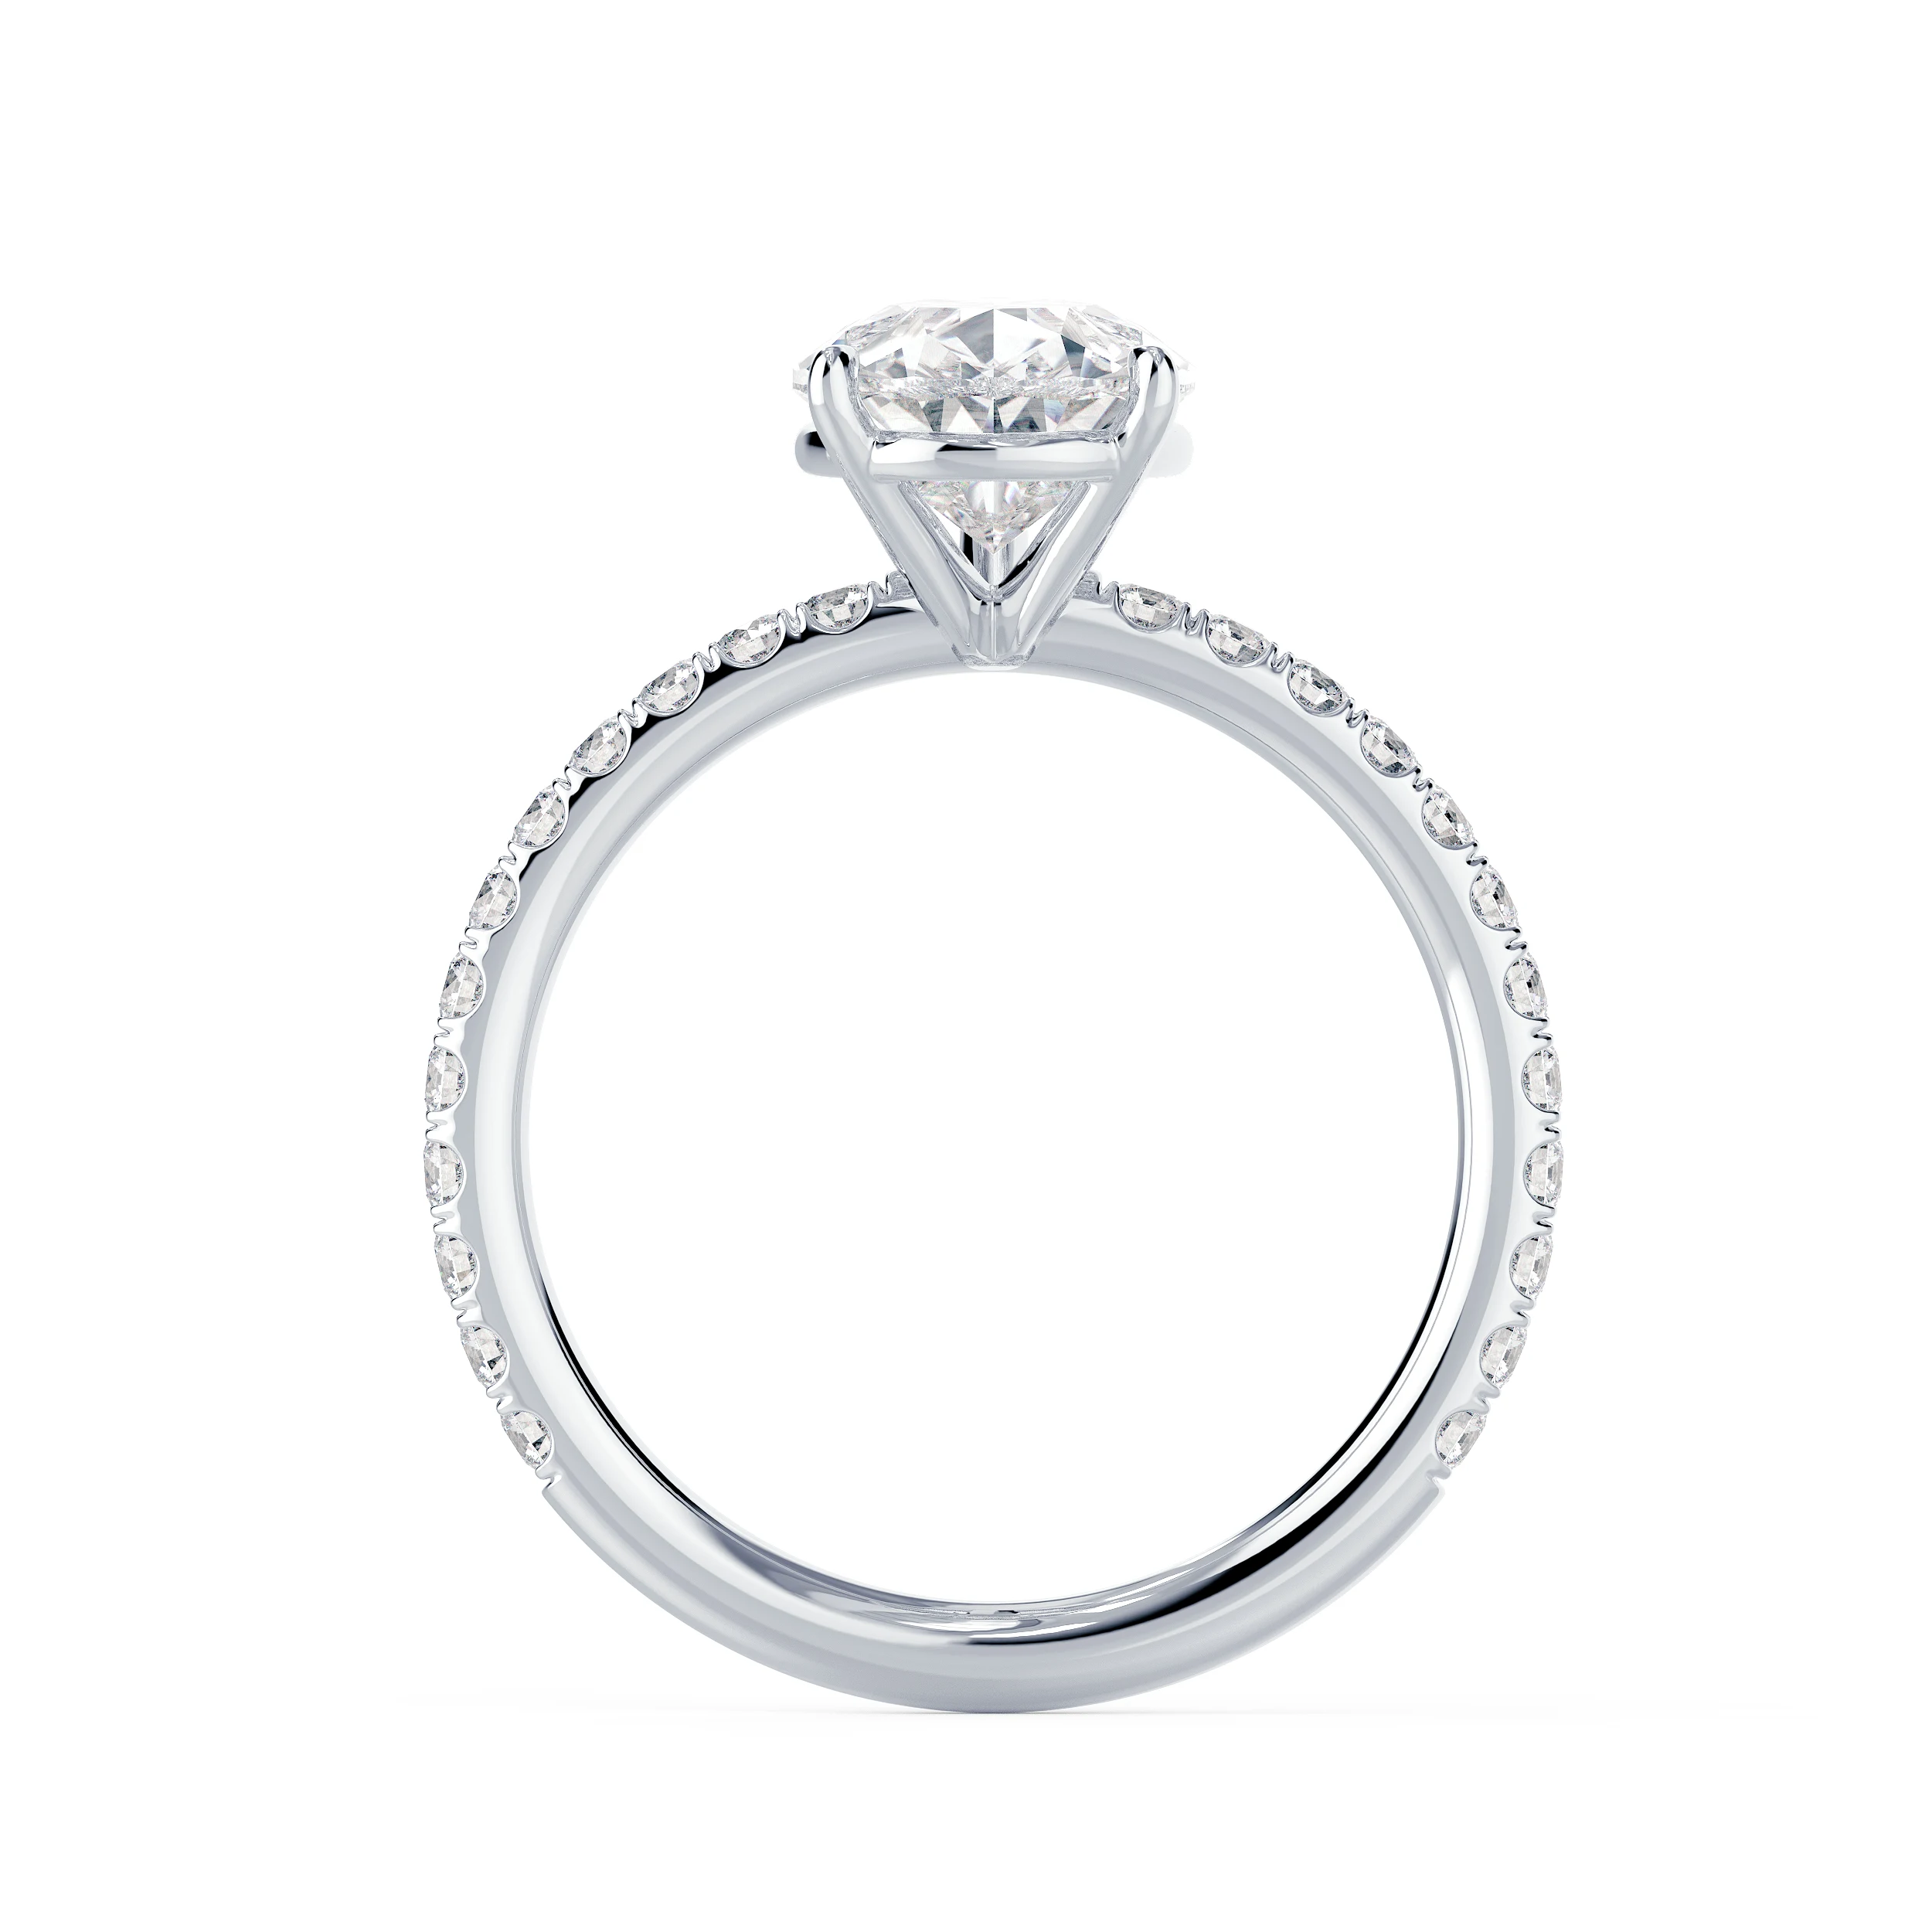 Synthetic Diamonds Pear Petite Pavé Diamond Engagement Ring in White Gold (Profile View)